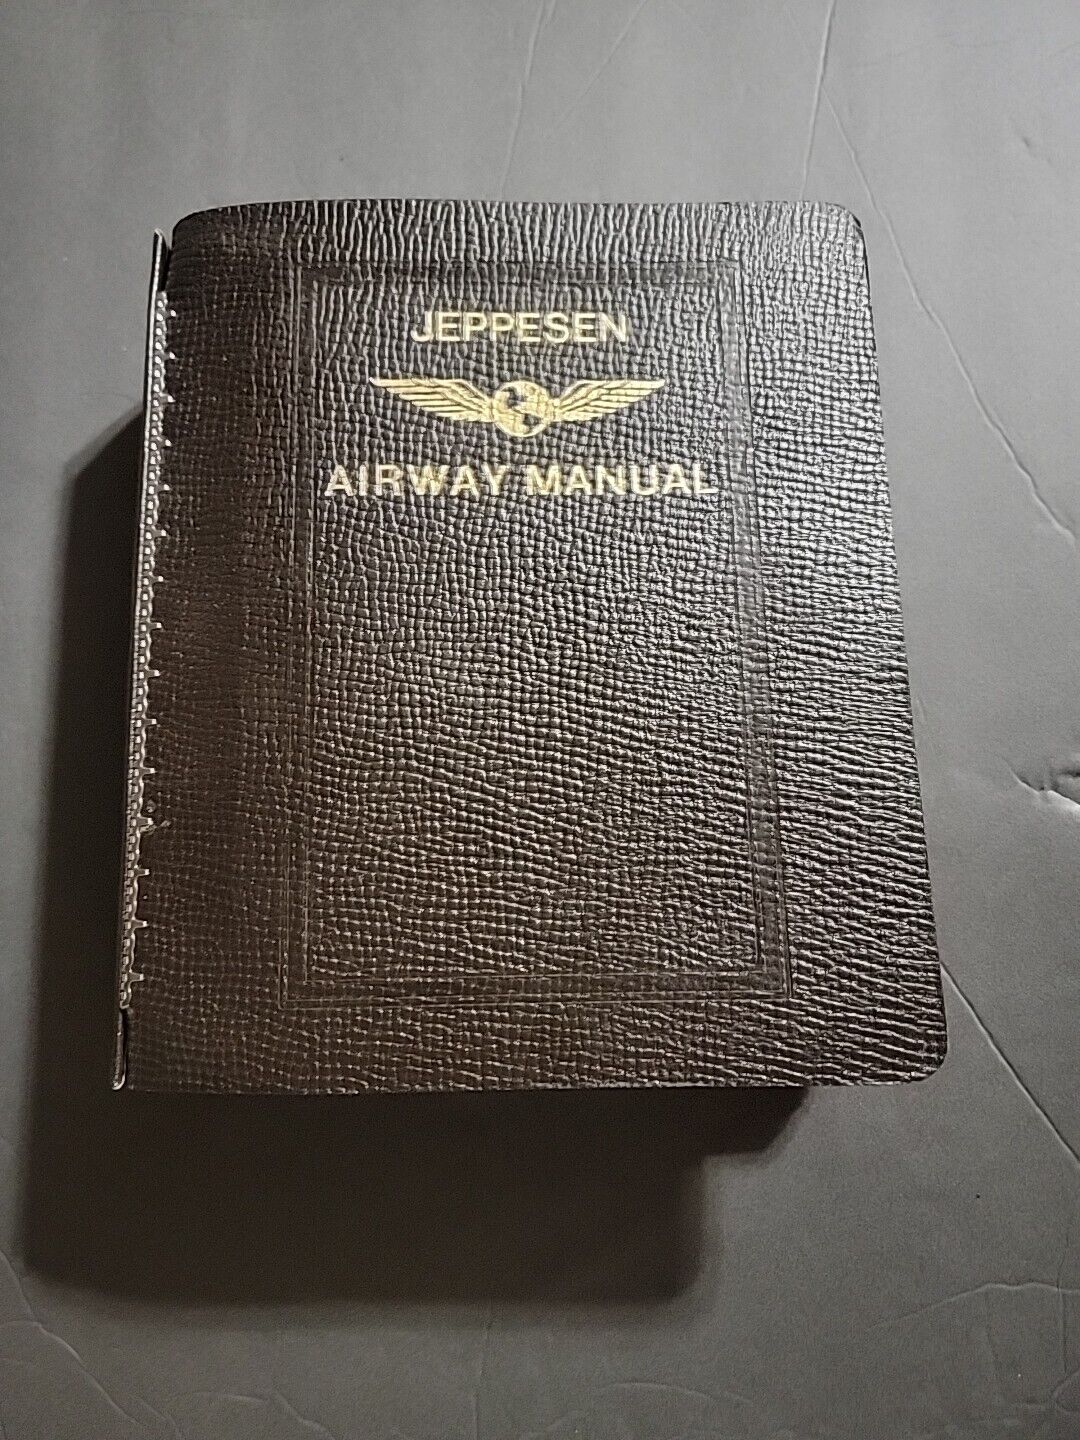 JEPPESEN AIRWAY MANUAL Pilot Leather Binder Book Maps Charts Terminal Guides VTG